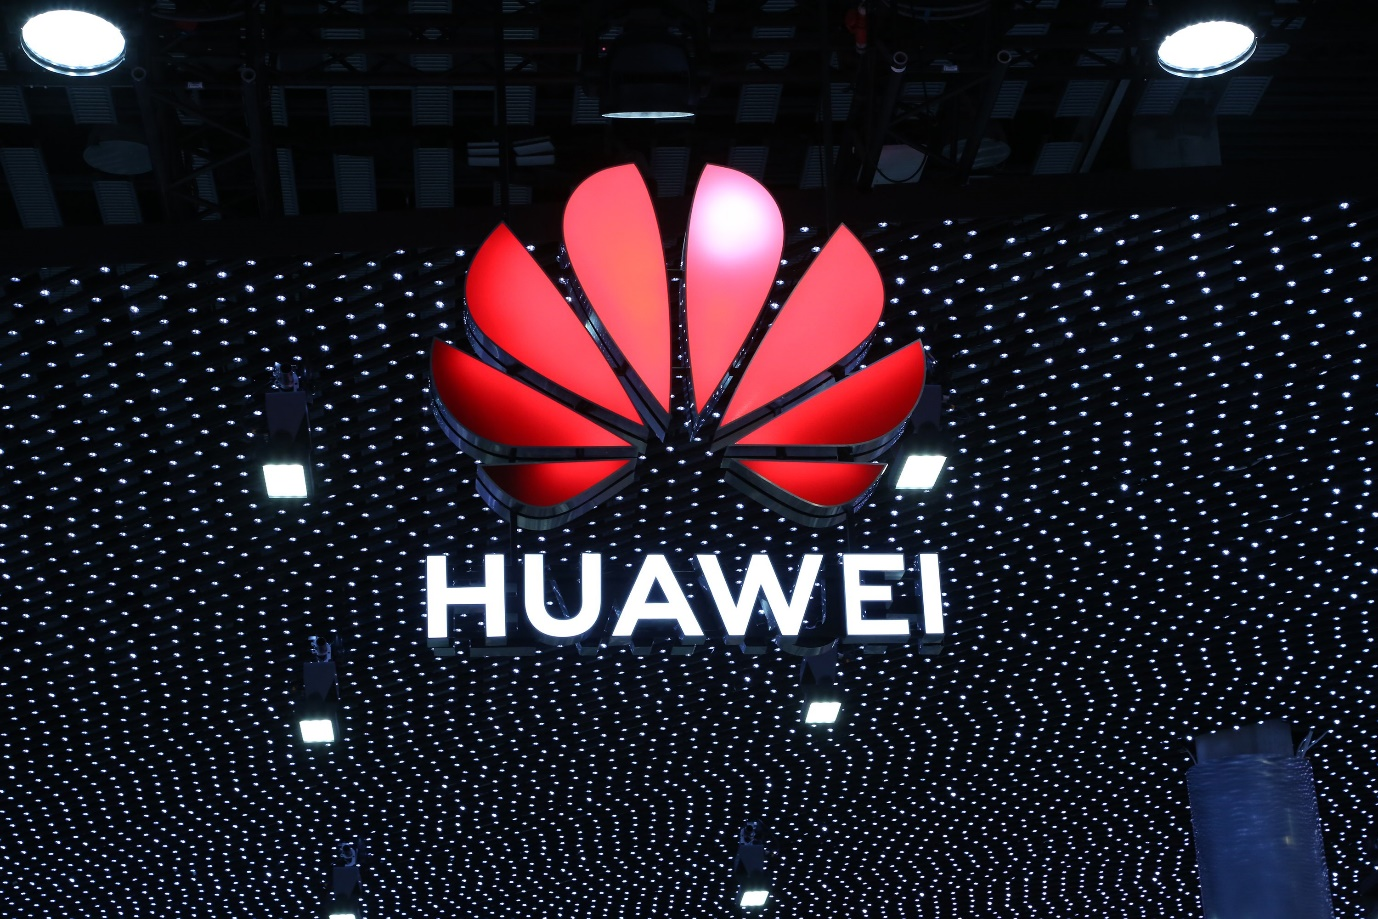 Huawei-reports-a-16.5%-drop-in-revenues-in-the-first-quarter,-warns-of -another-challenging-year'-ahead